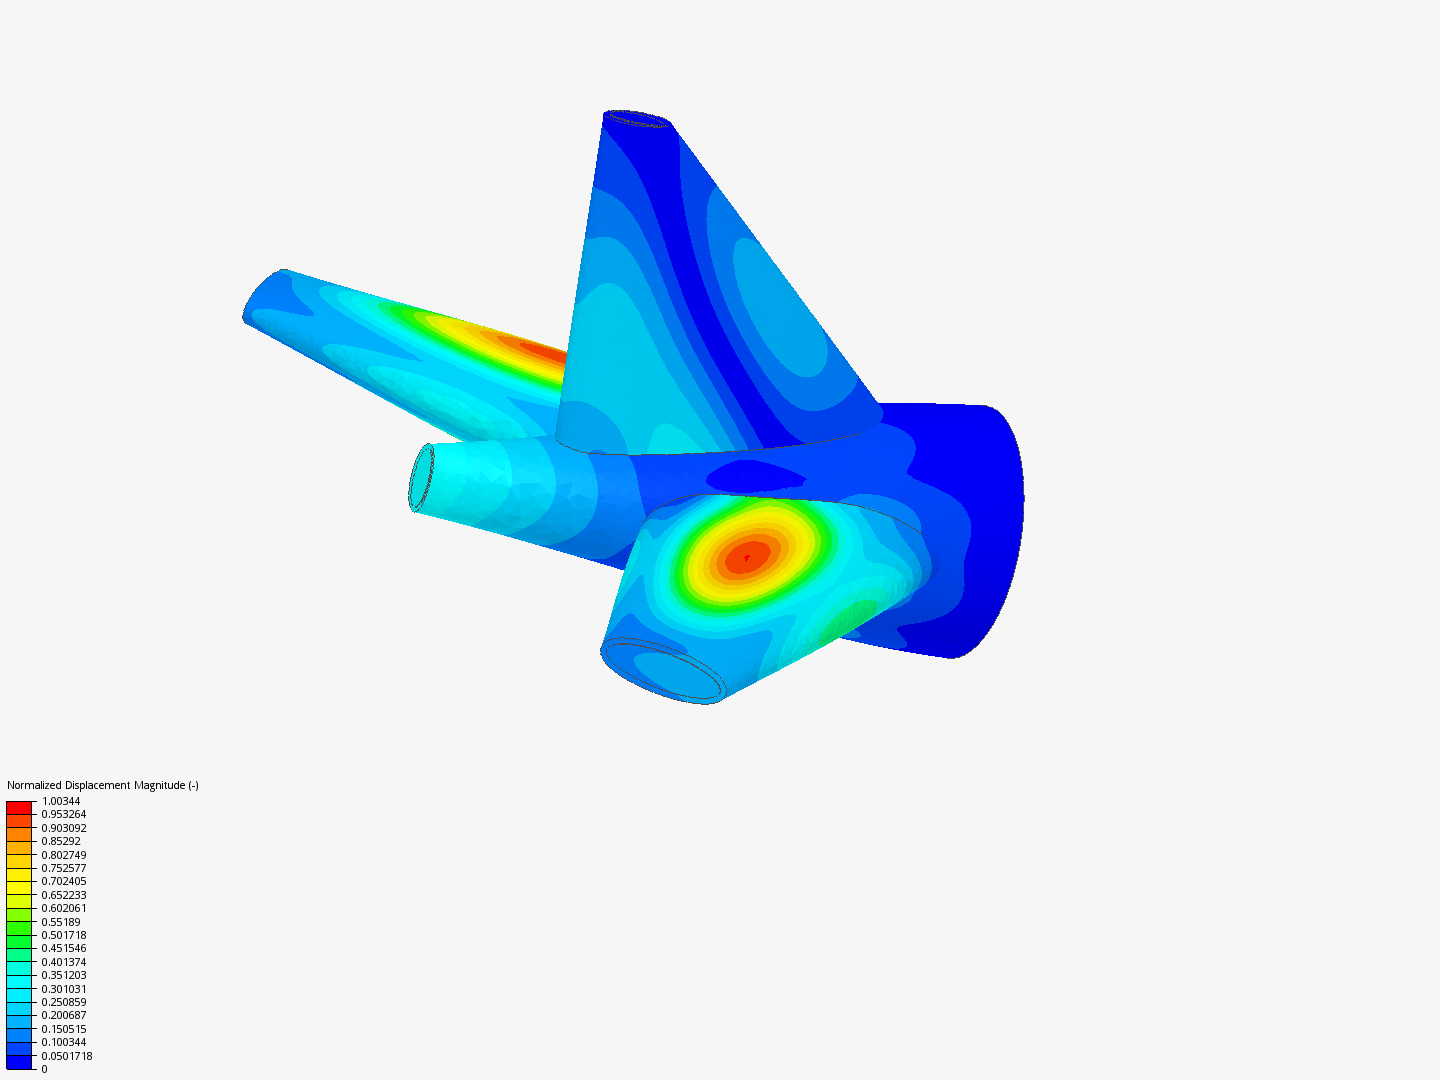 Vibration Analysis of a airplane wing image